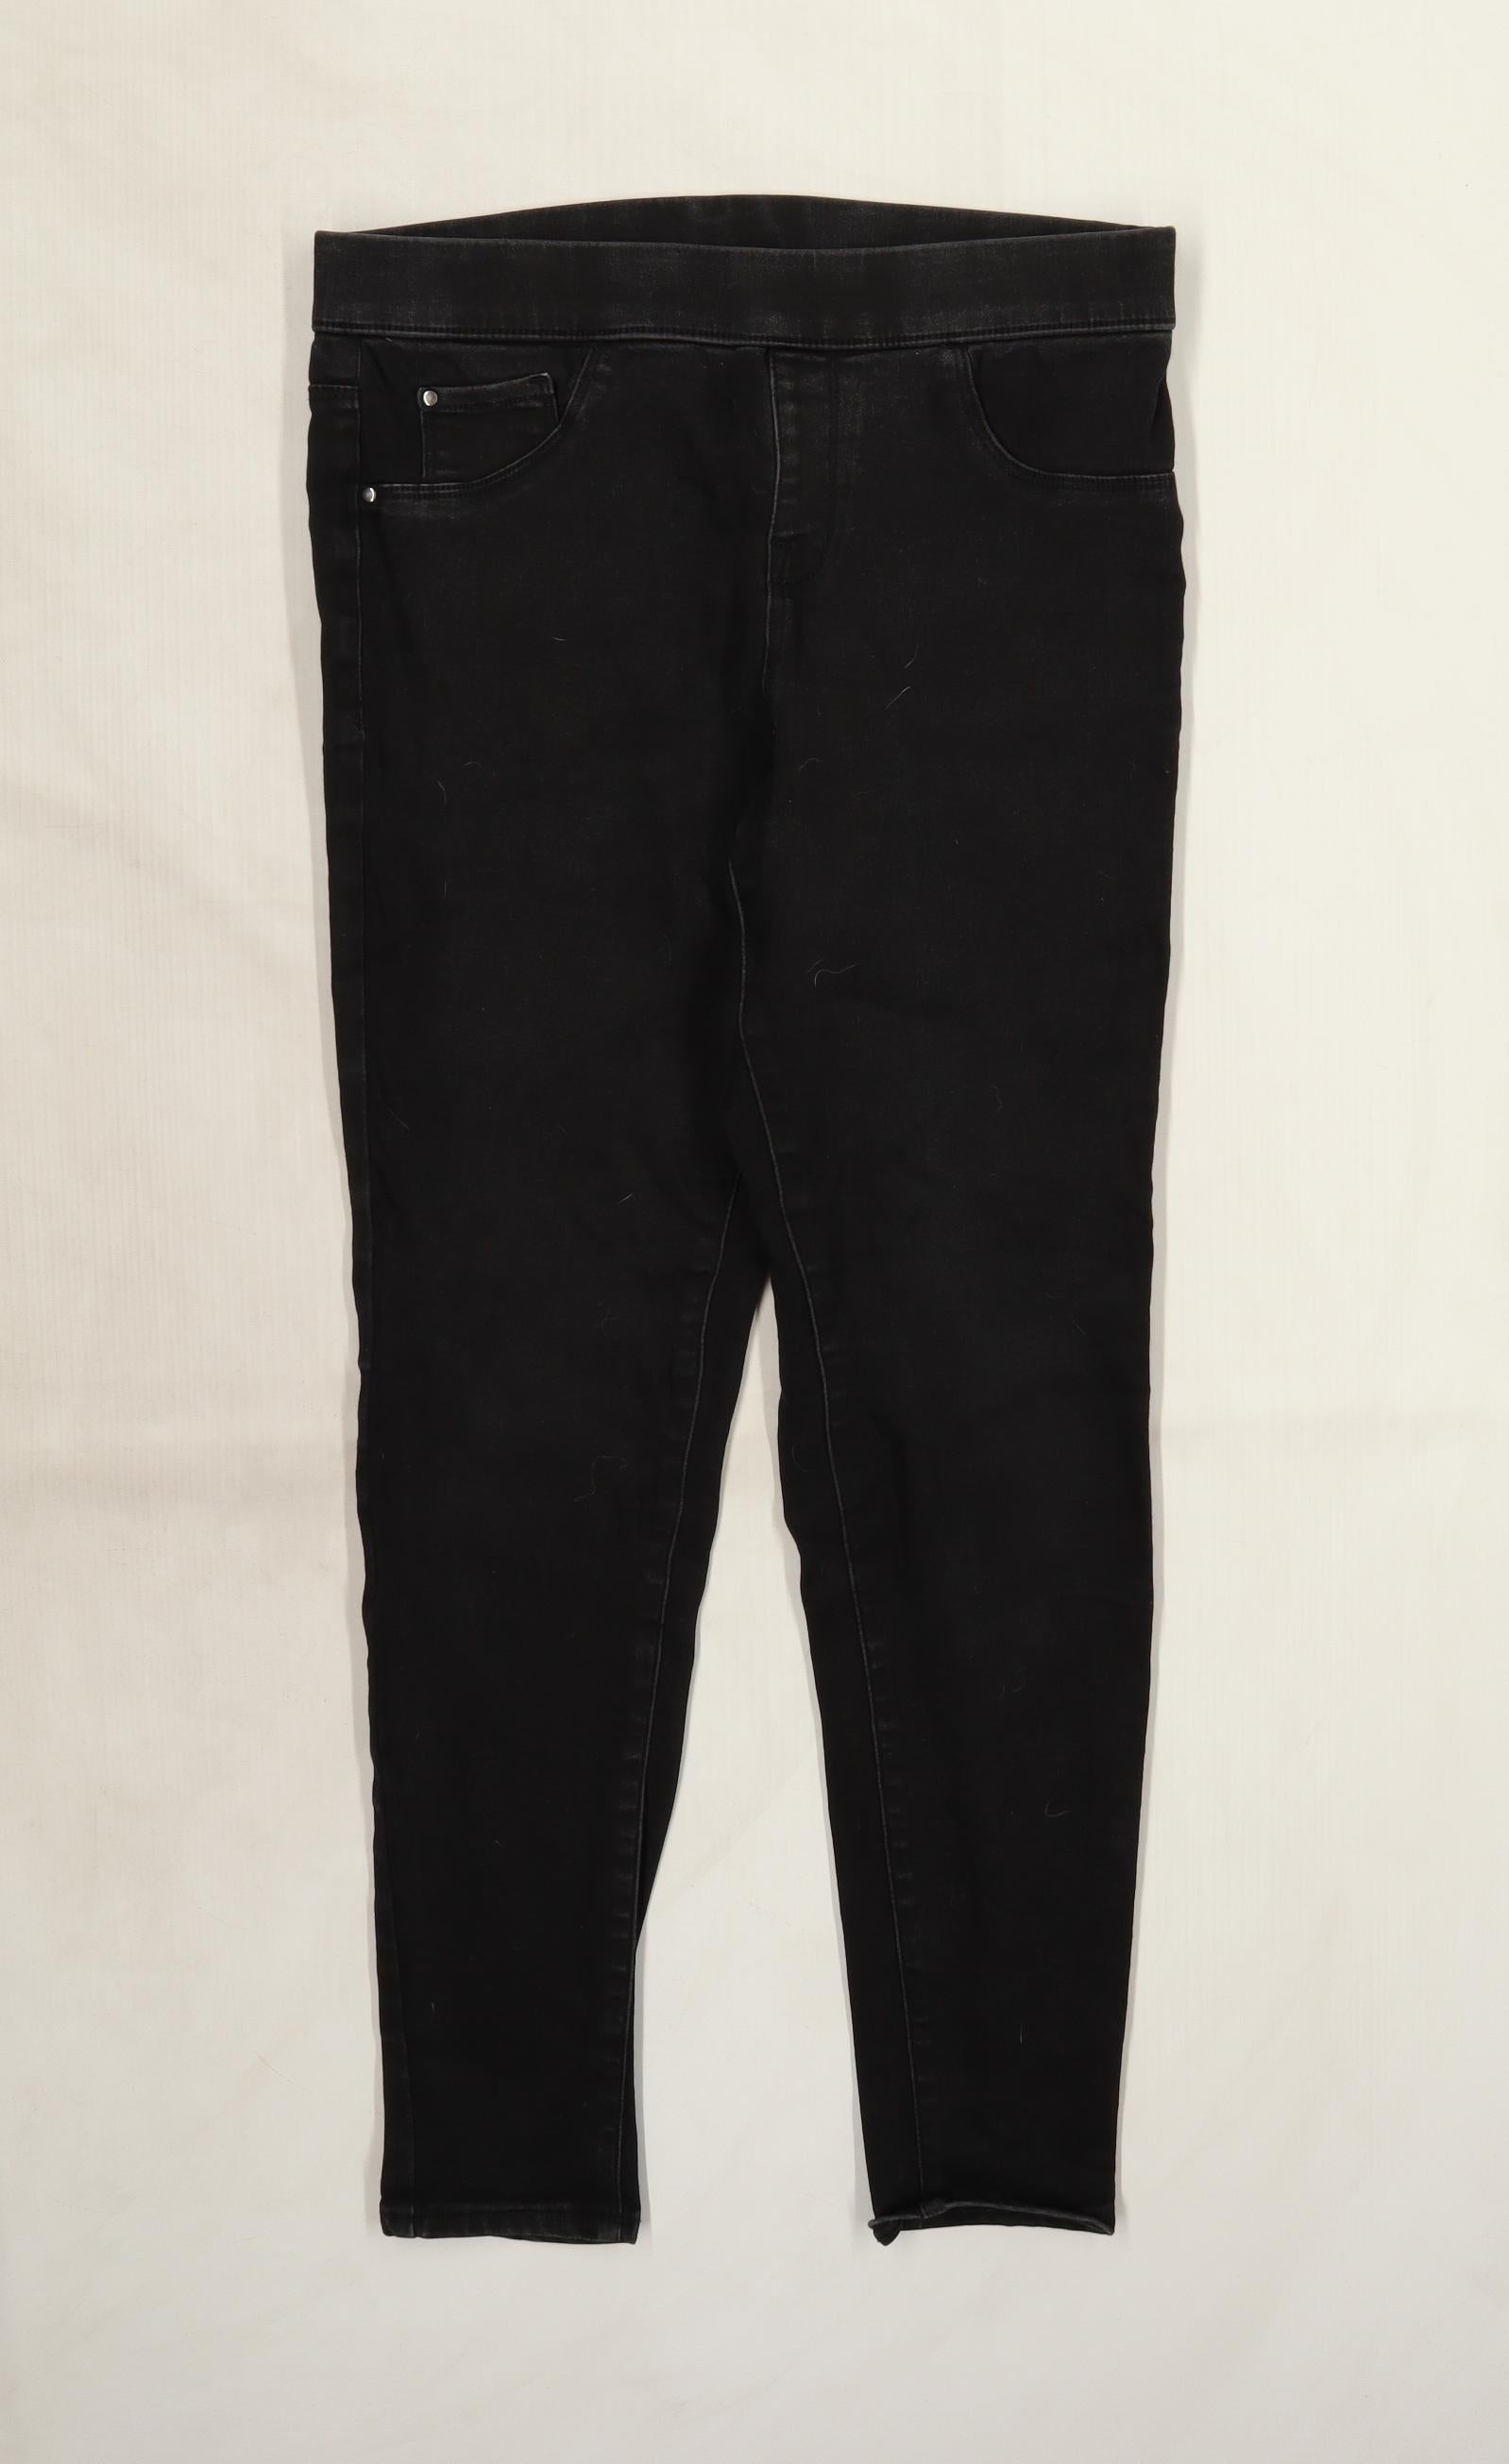 George Womens Black Straight Leg Stretch Trousers Size 18S - ASDA Groceries